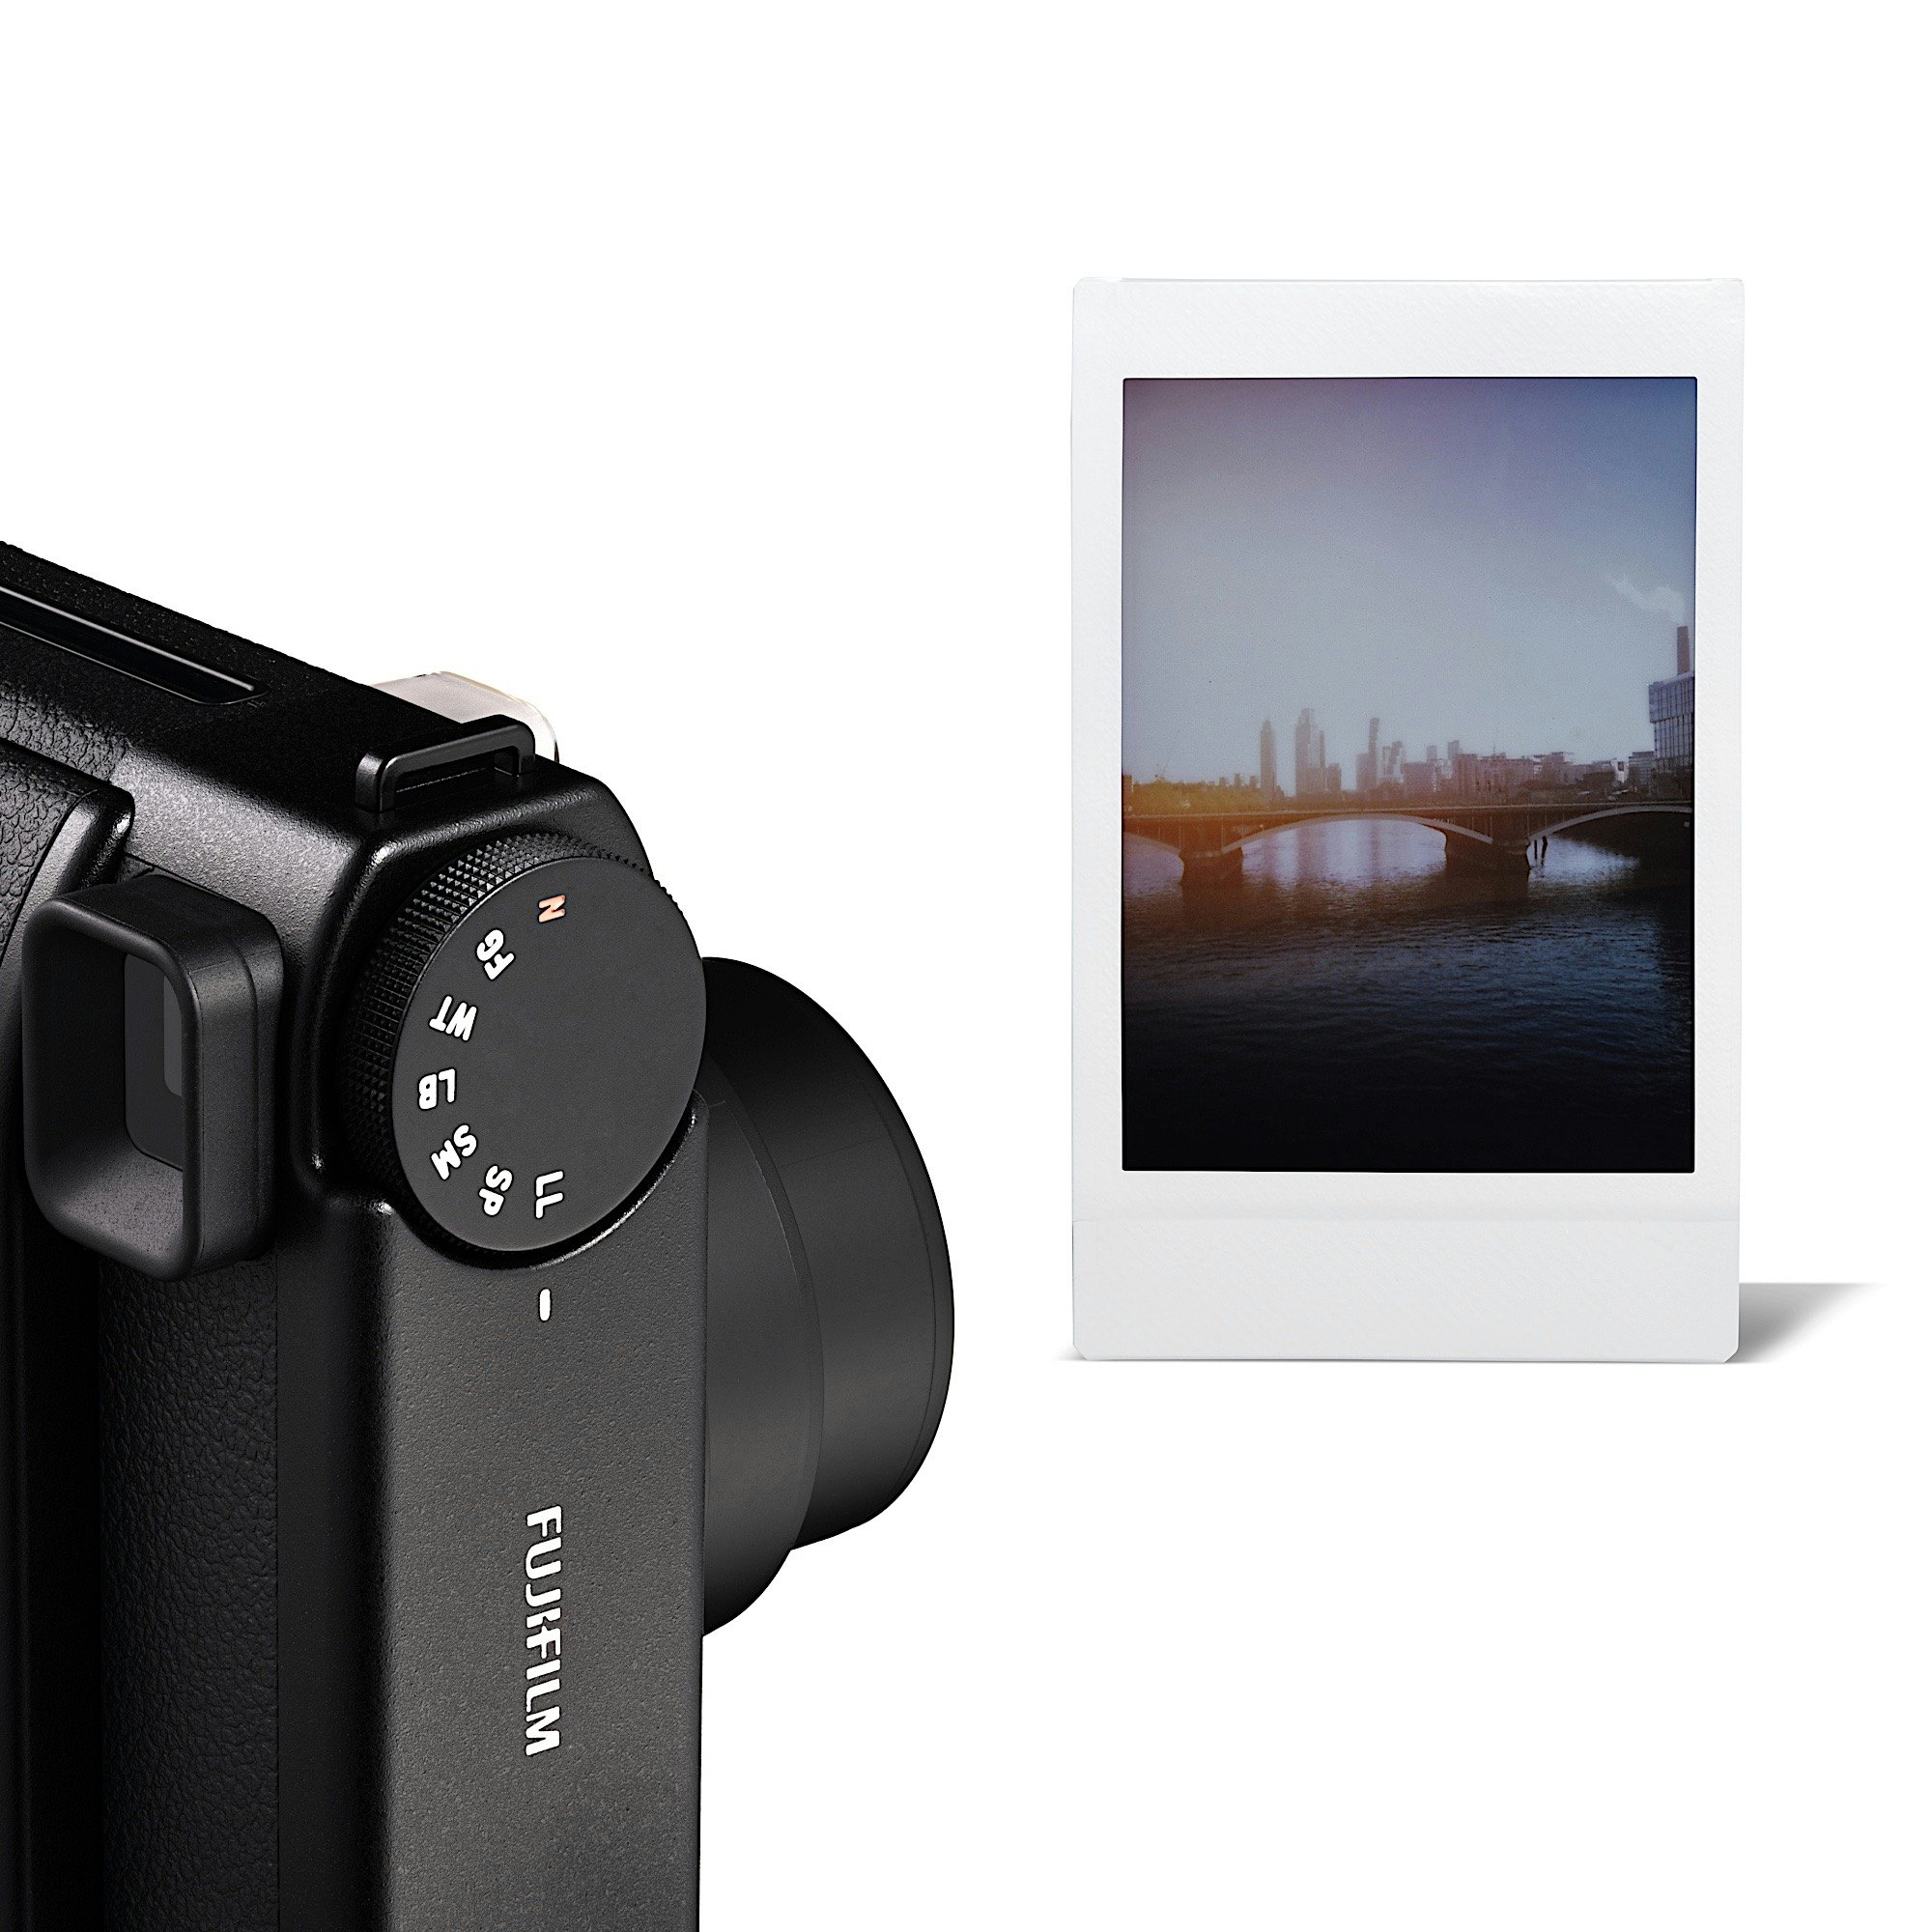 PRE ORDER* The Fujifilm Mini 99 is now available for pre-order